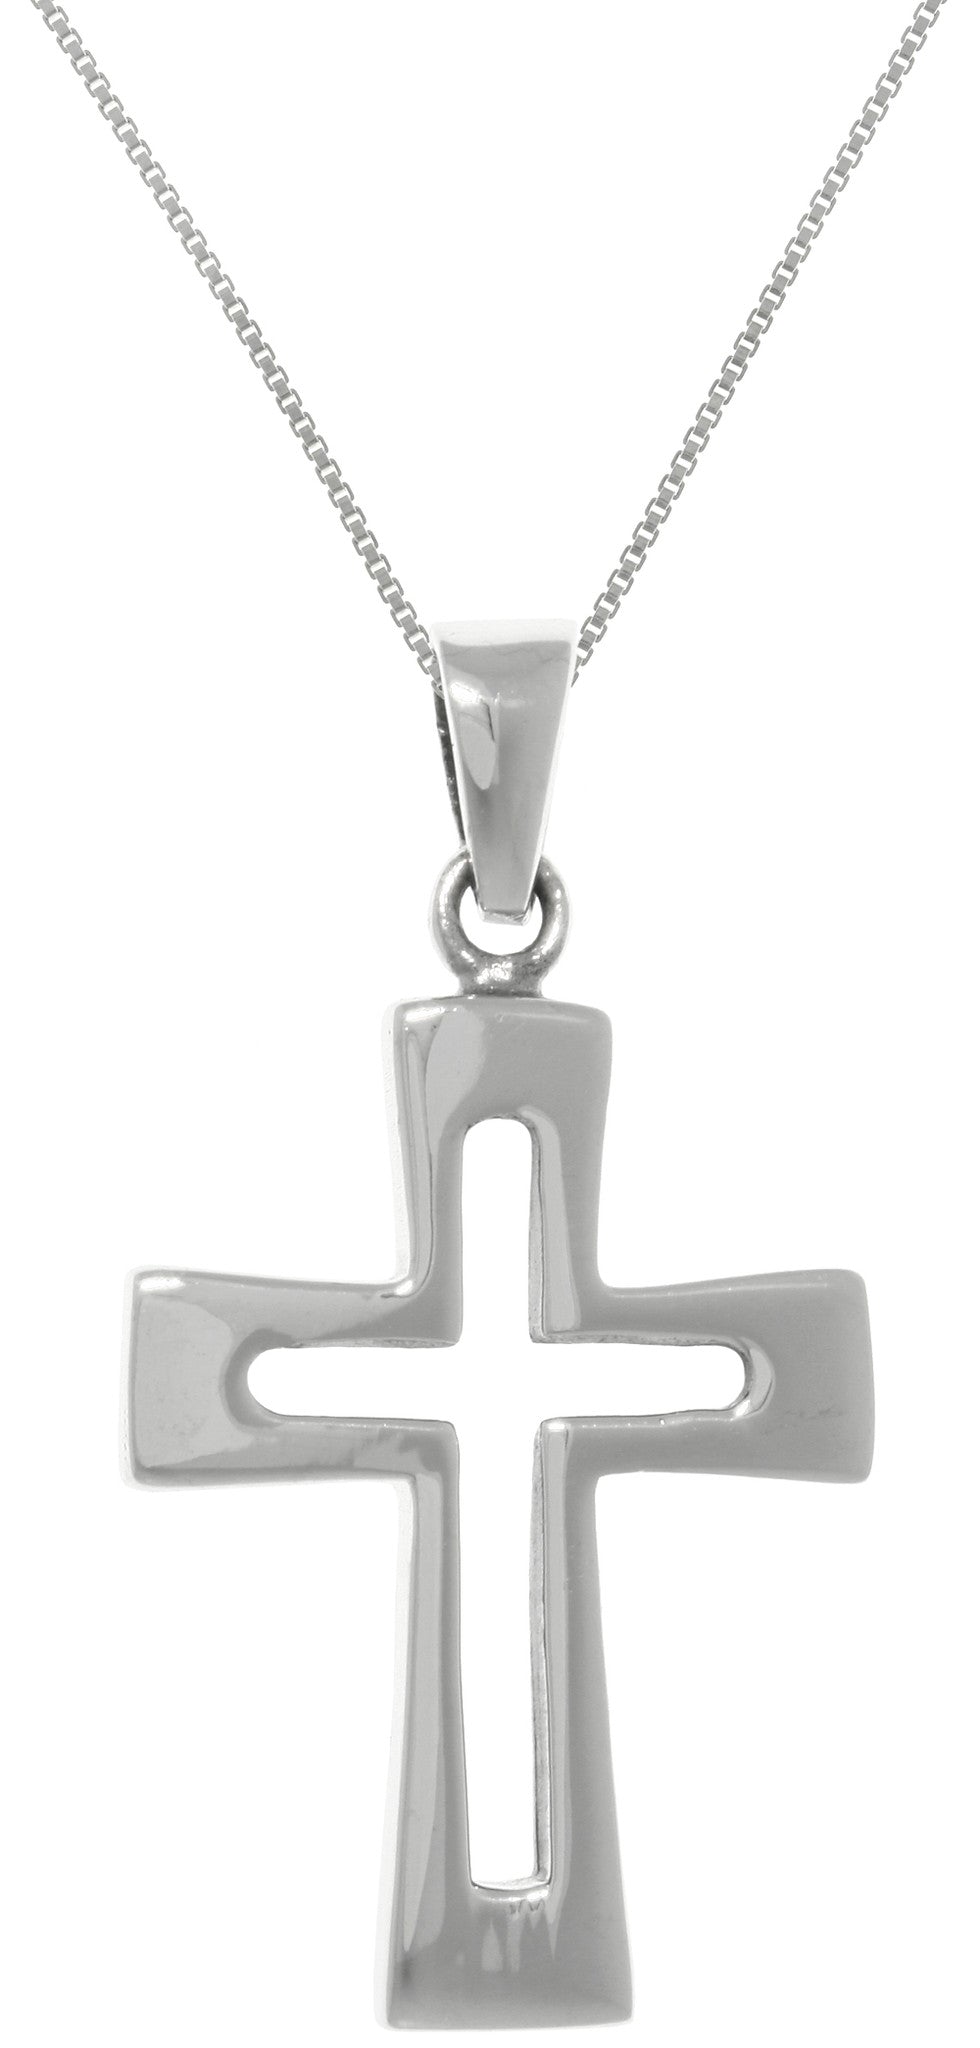 Jewelry Trends Sterling Silver Cross Pendant with Open Design on Box Chain Necklace